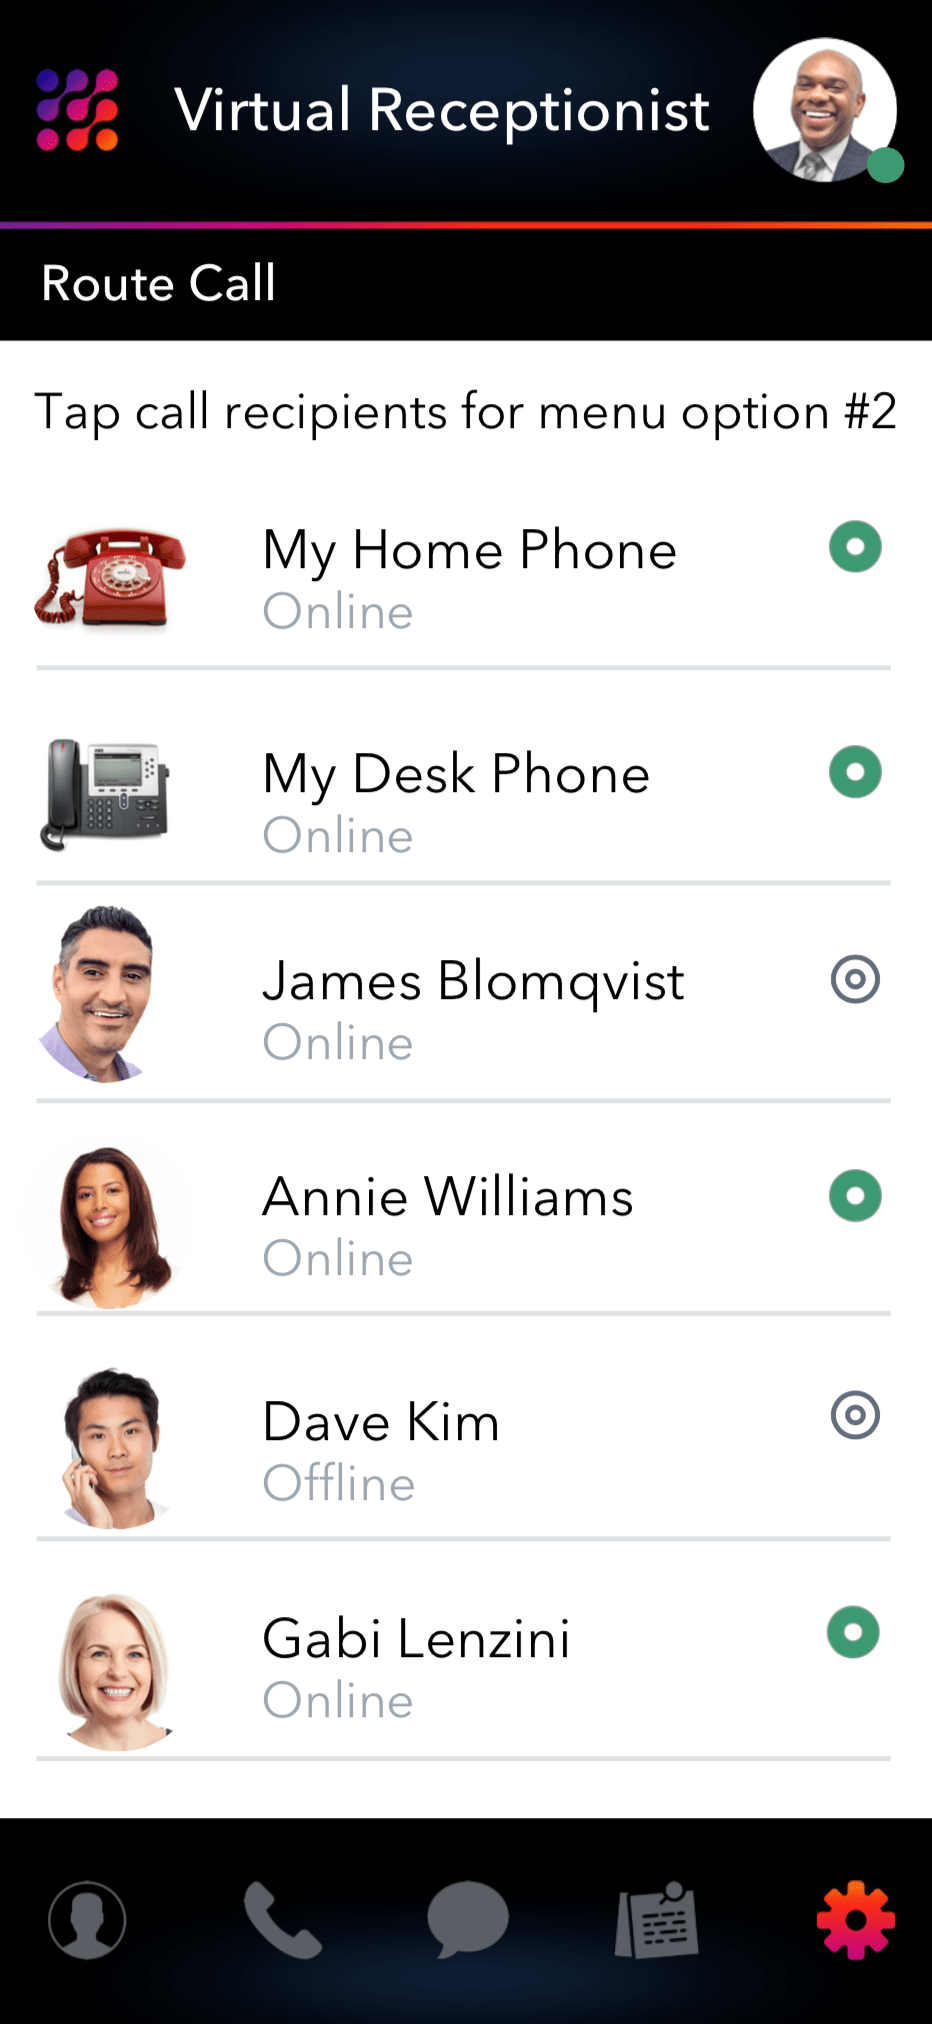 Virtual Receptionist and Select Call Routing Recipients App Screenshot